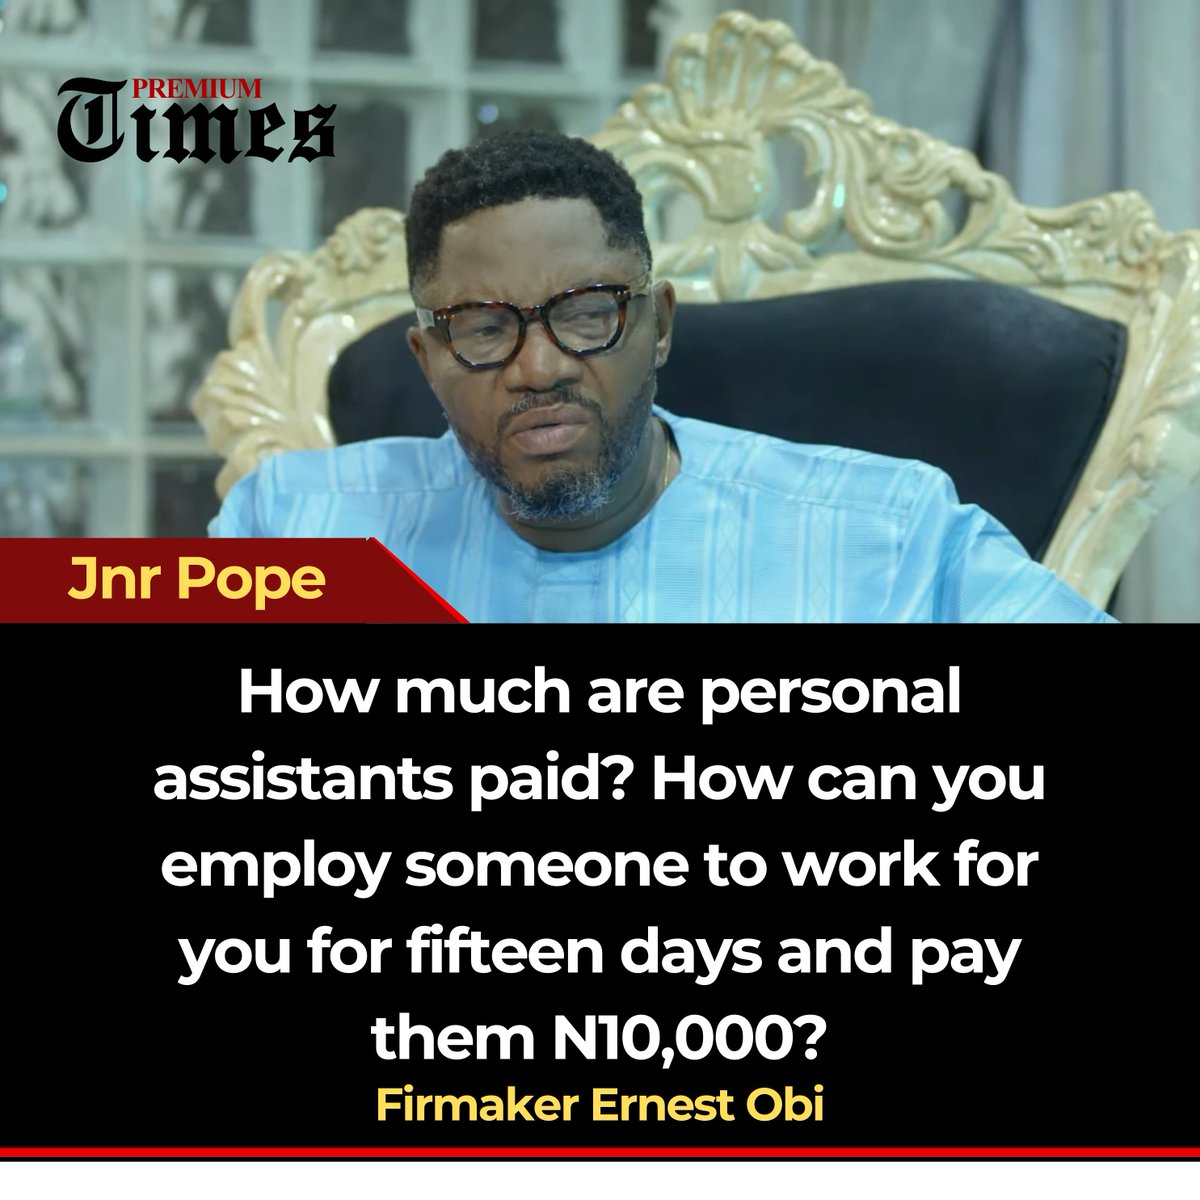 Jnr Pope: Movie producers pay assistants N10,000 for 15 days – Filmmaker Ernest Obi. Even if it’s just seven days, the amount is meagre, and they will be lifting generators and carrying cables. “When it rains, the PAs will be outside while the producers will be inside the room.